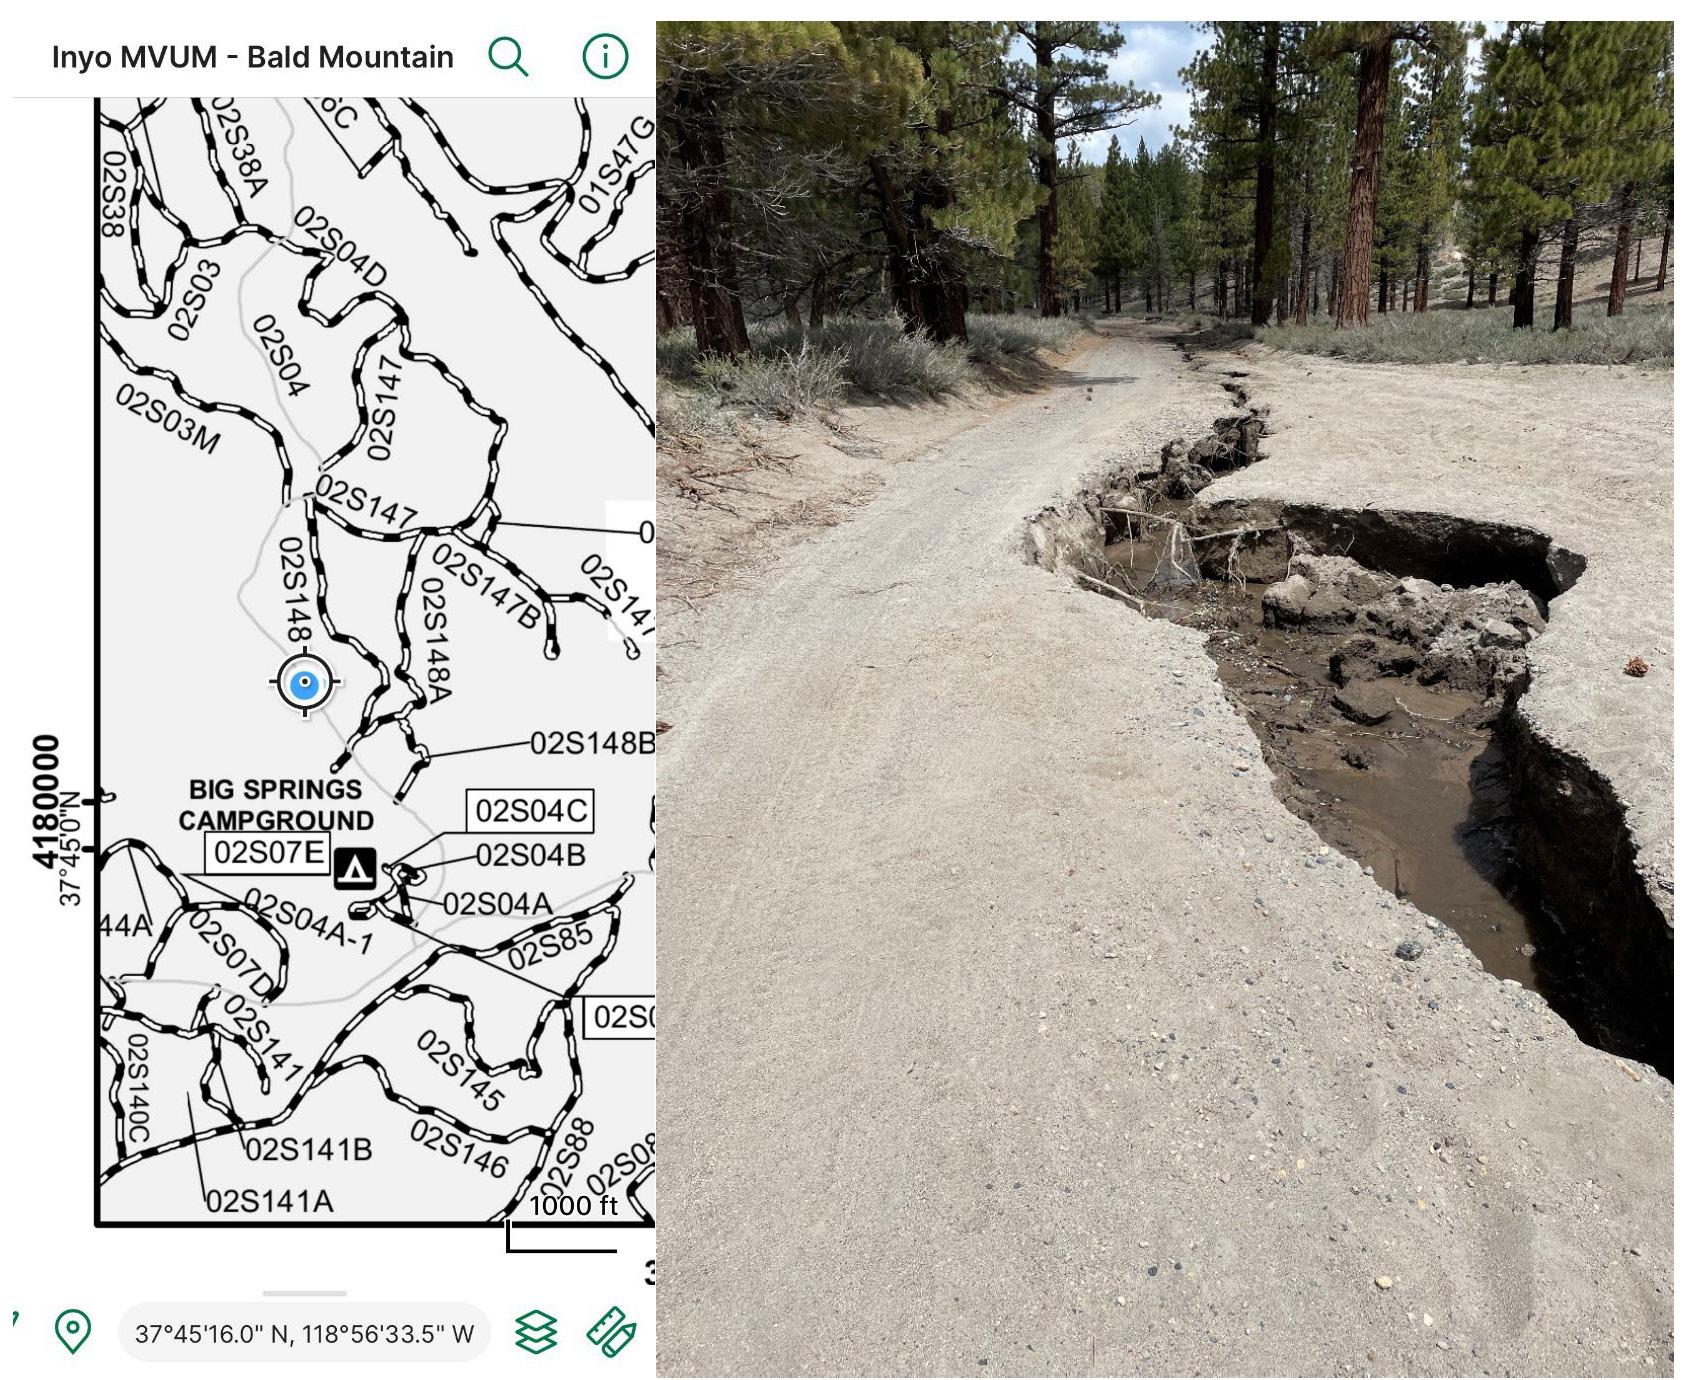 Images showing location map and big washout from snowmelt flooding of Forest Service 2S04 Road located behind Big Springs